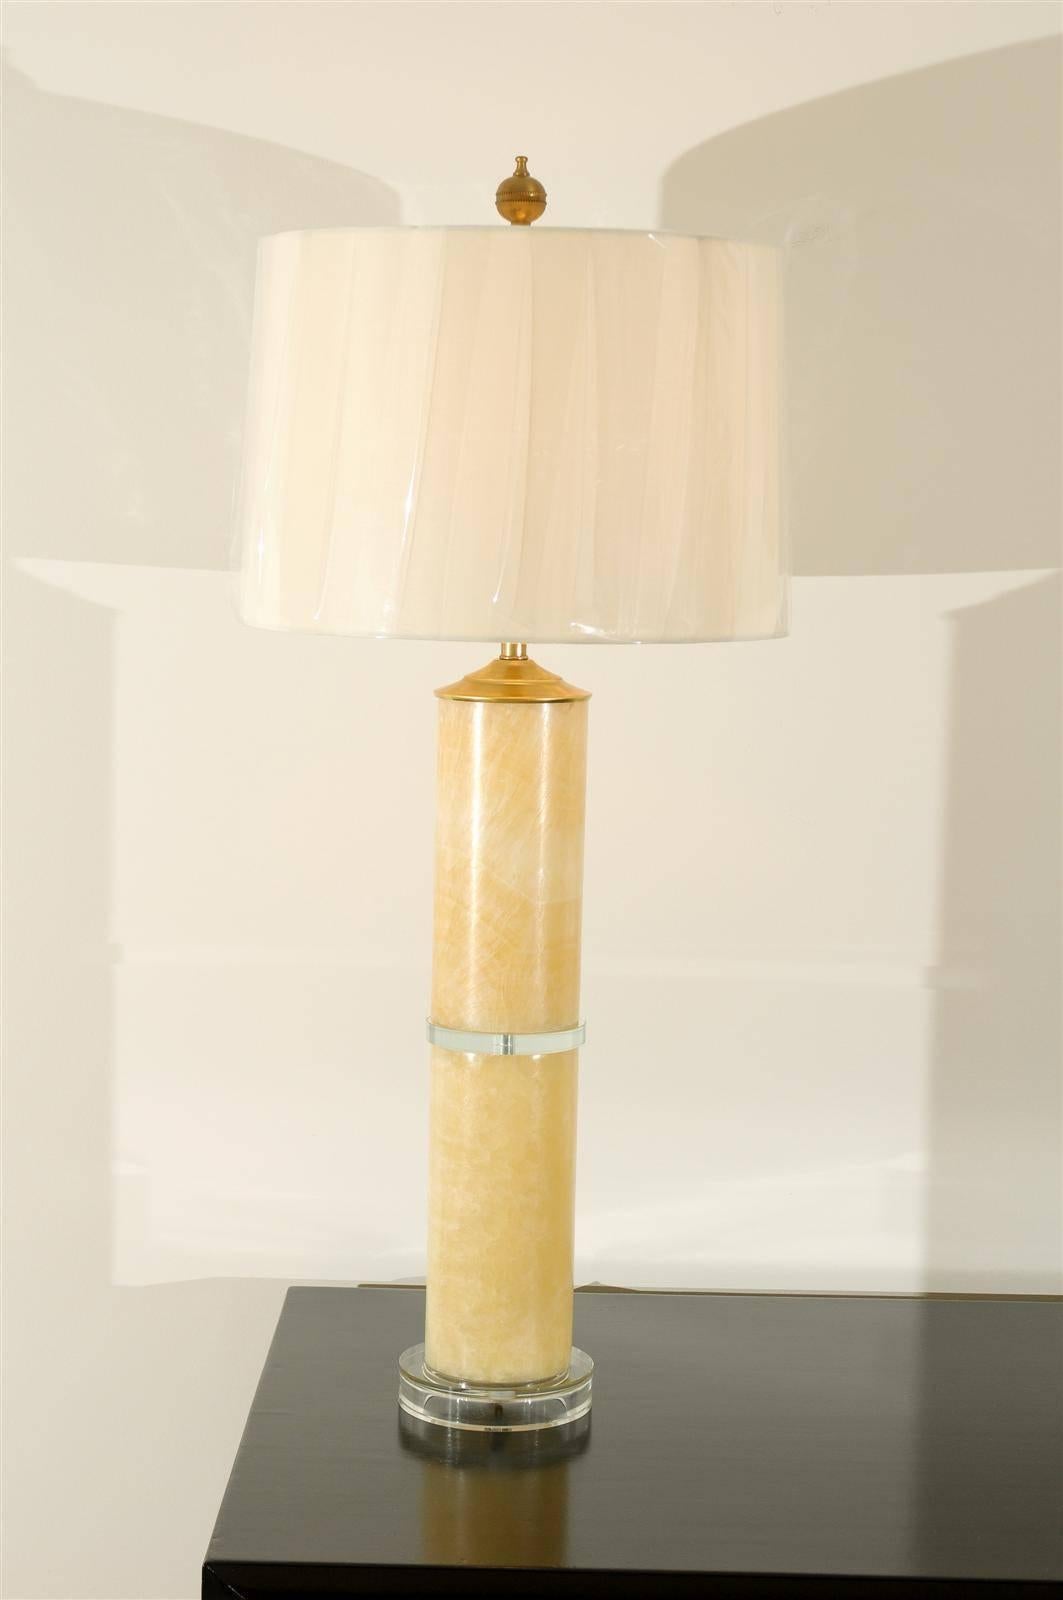 A beautiful pair of marble cylinder lamps, circa 1980s. Fabulous scale and color. Exquisite jewelry! Excellent restored condition. Rewired using clear cord, new three-way sockets with brass turn switch and new glass bases. Complete with new neutral